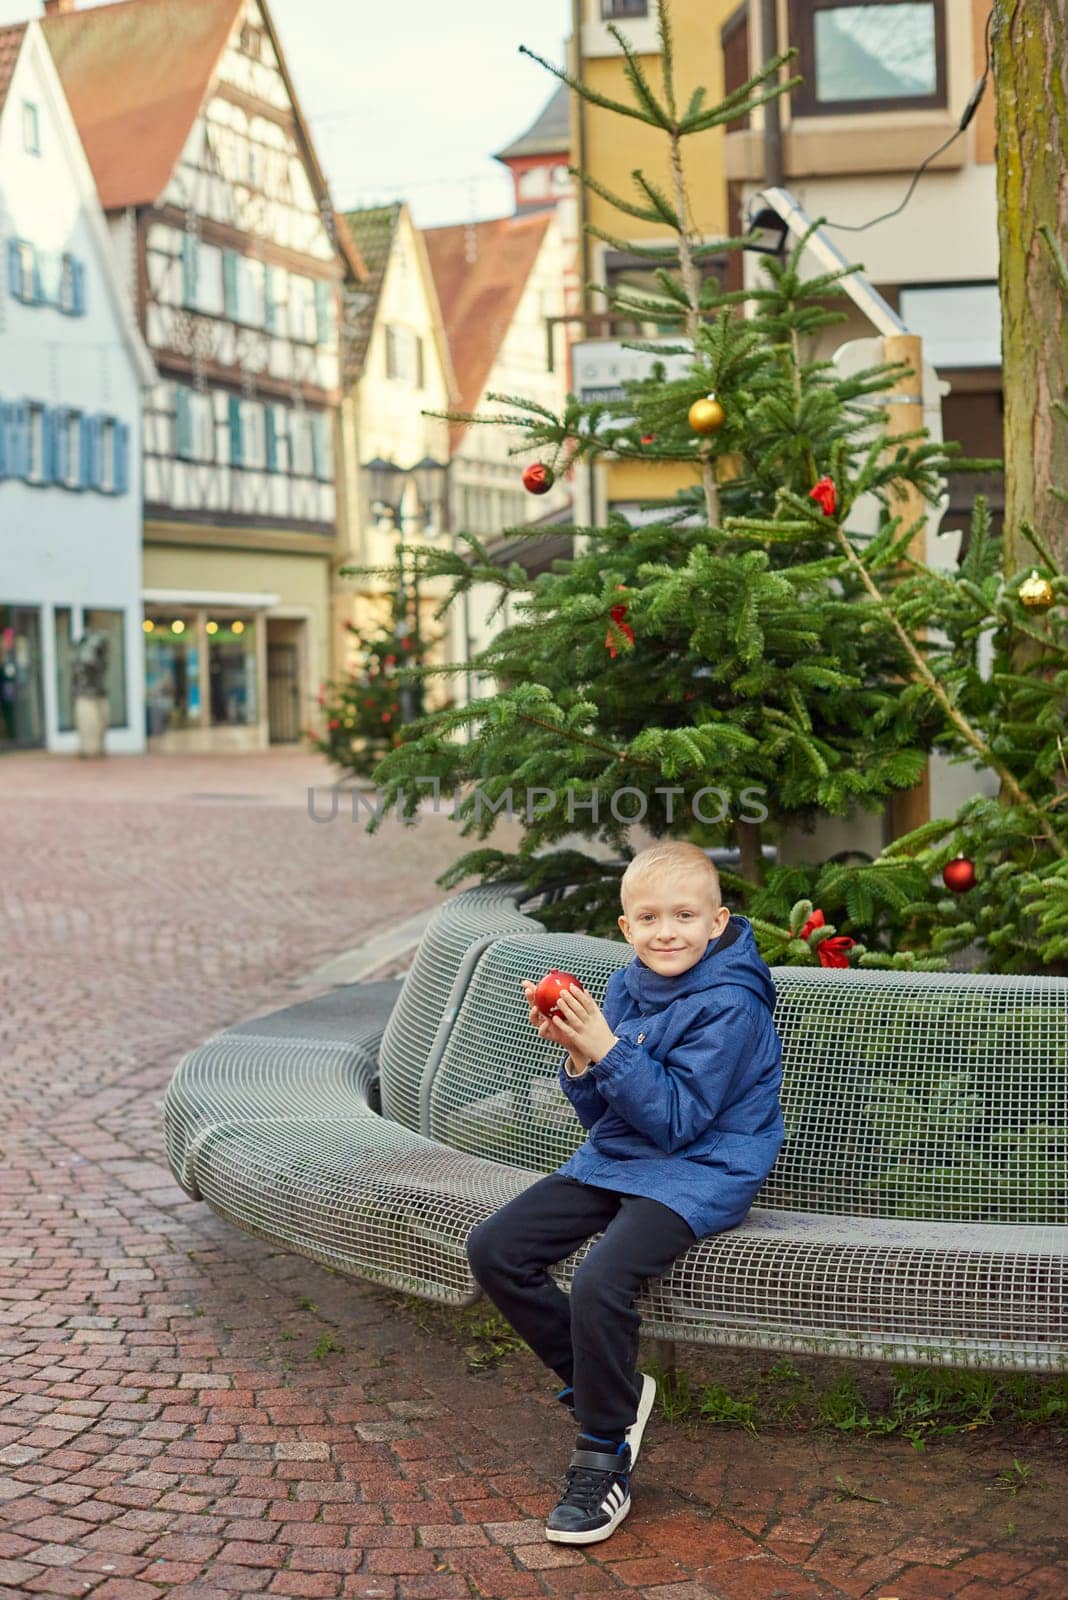 Winter Wonderland Delight: 8-Year-Old Boy with Christmas Decor by Vintage Fountain. by Andrii_Ko